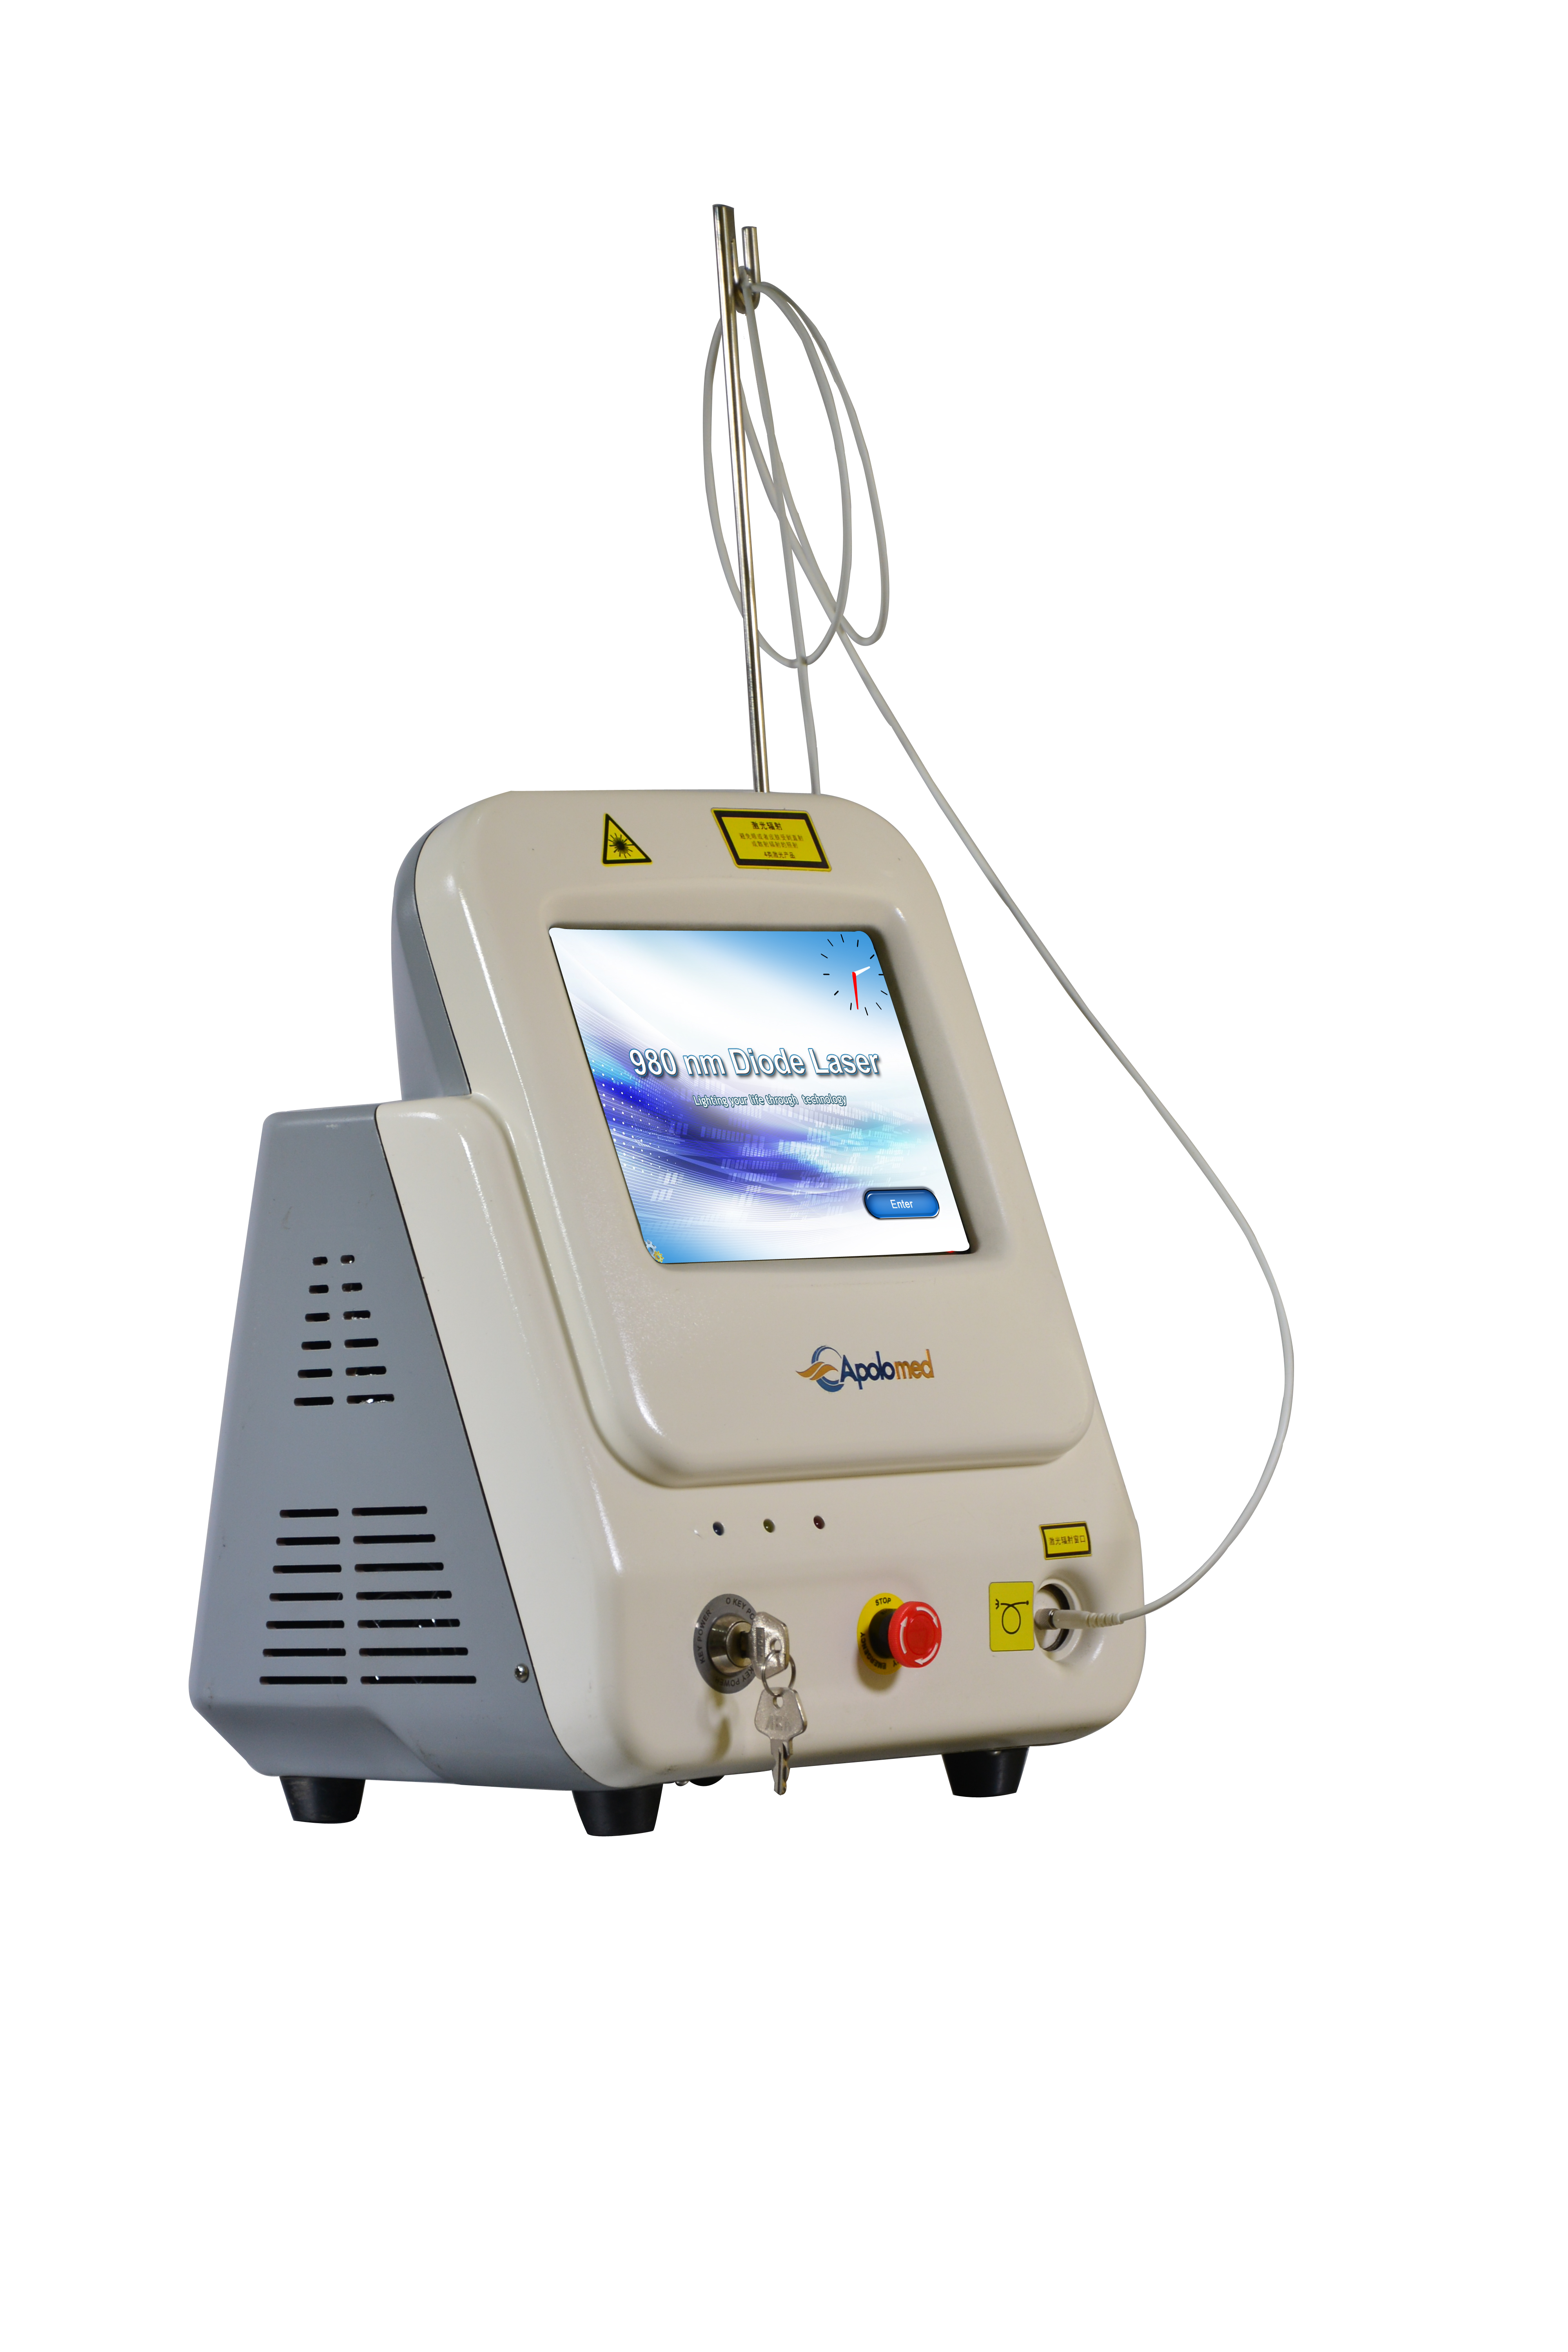 Portable Physiotherapy 980nm Diode Laser With Fiber